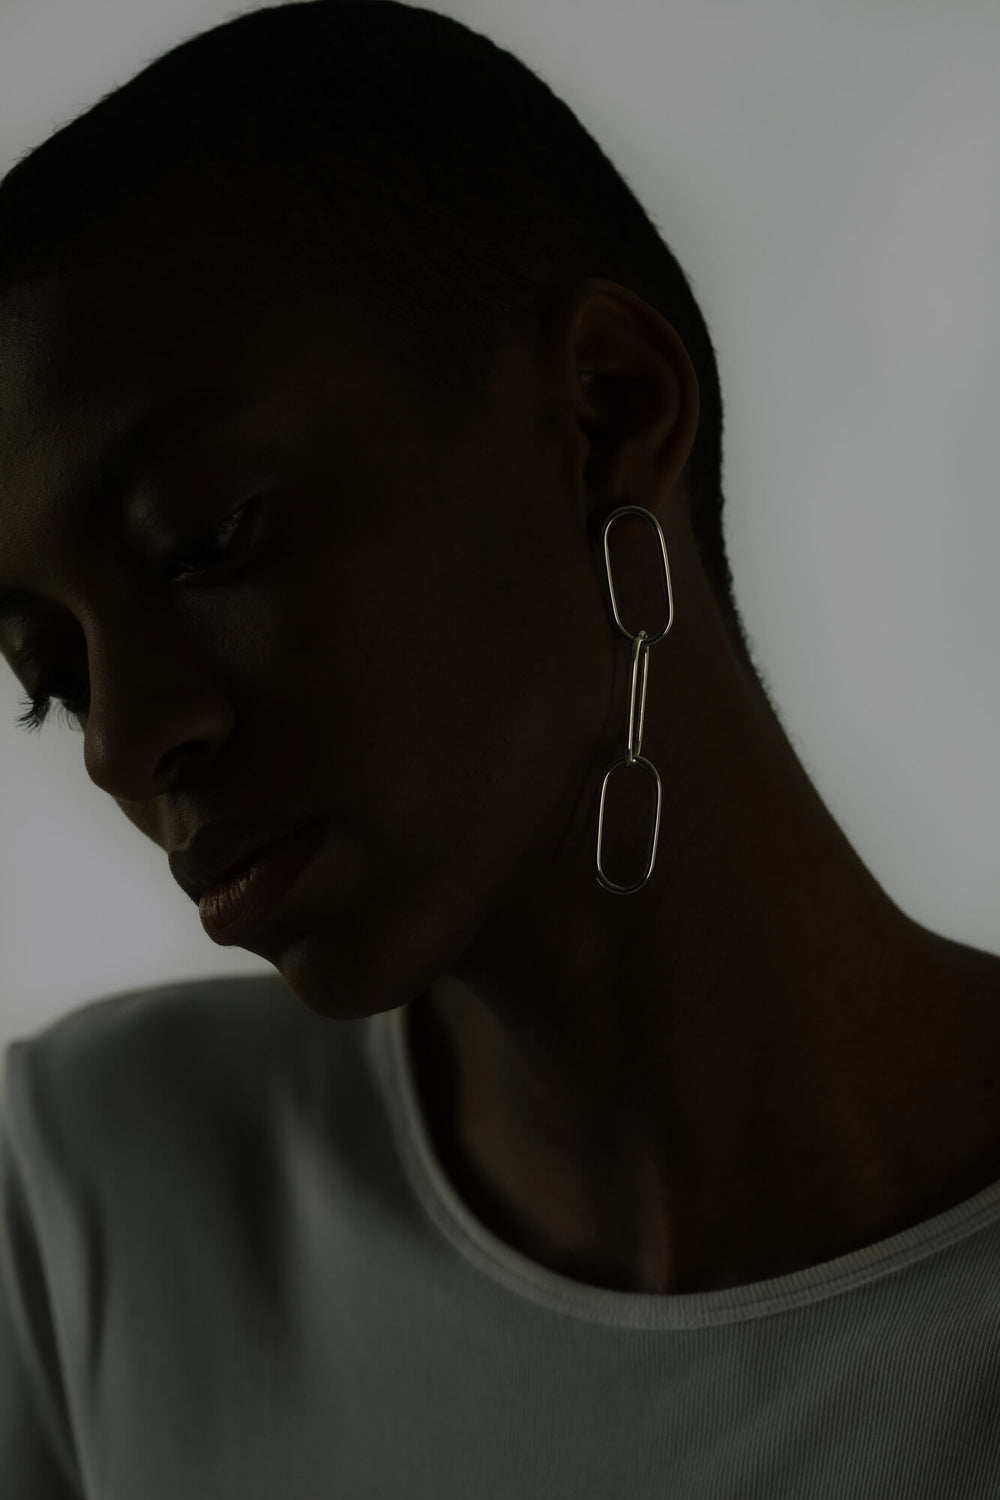 Dangling statement earring made from bold link chains. Fine jewelry handmade in Berlin.